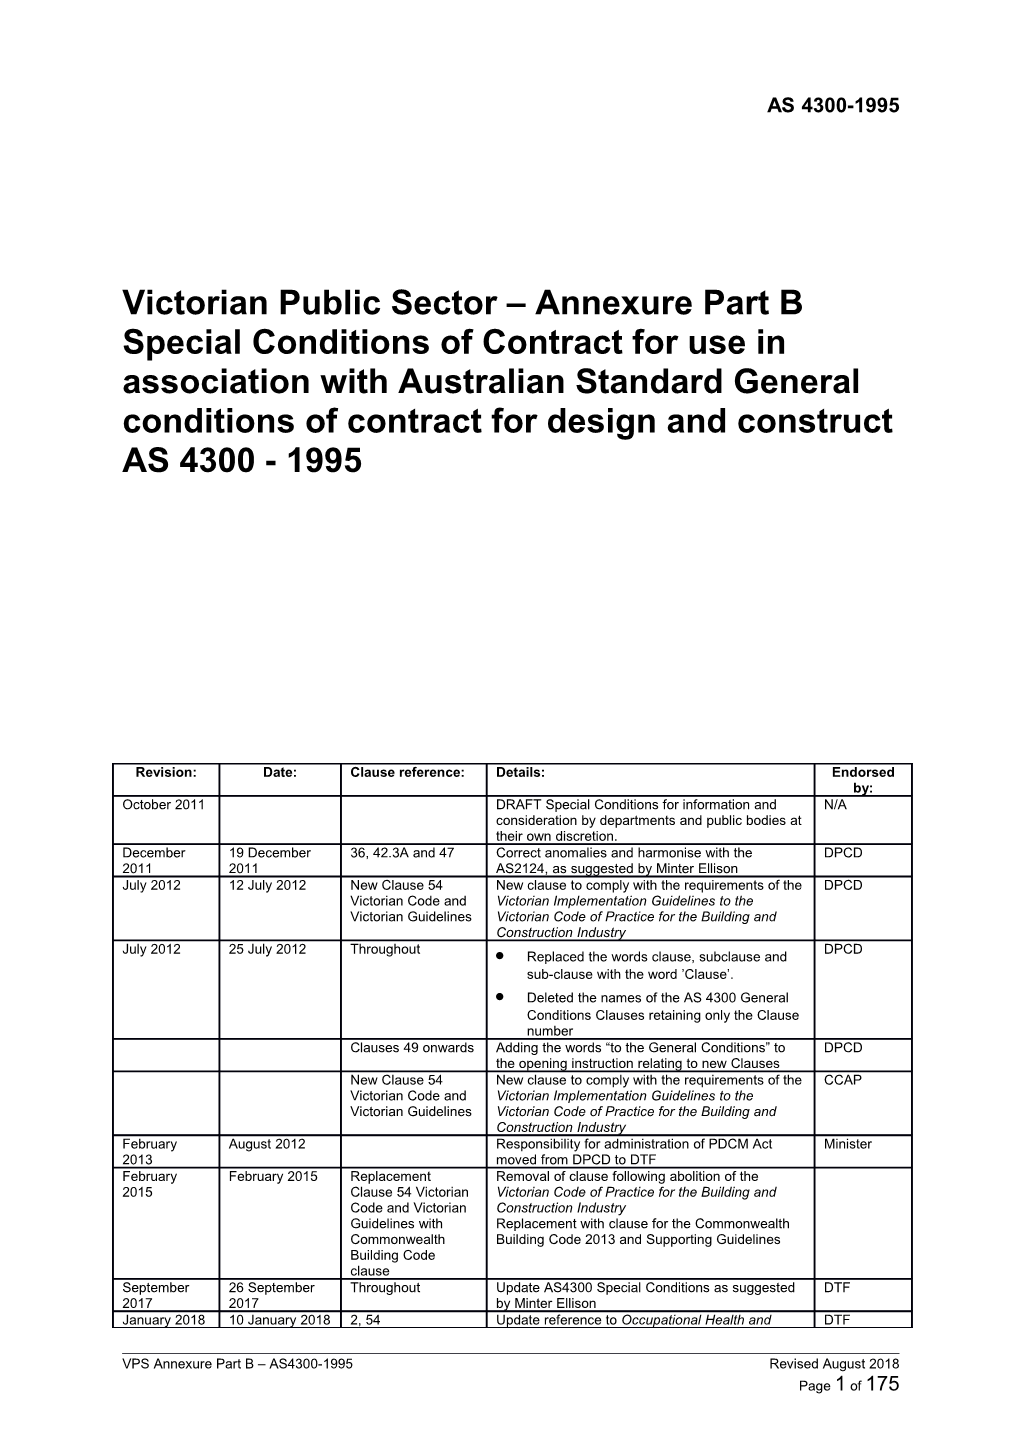 Victorian-Public-Sector-Special-Conditions-Of-Contract-For-Use-With-AS-2124 1992-(August-2018)